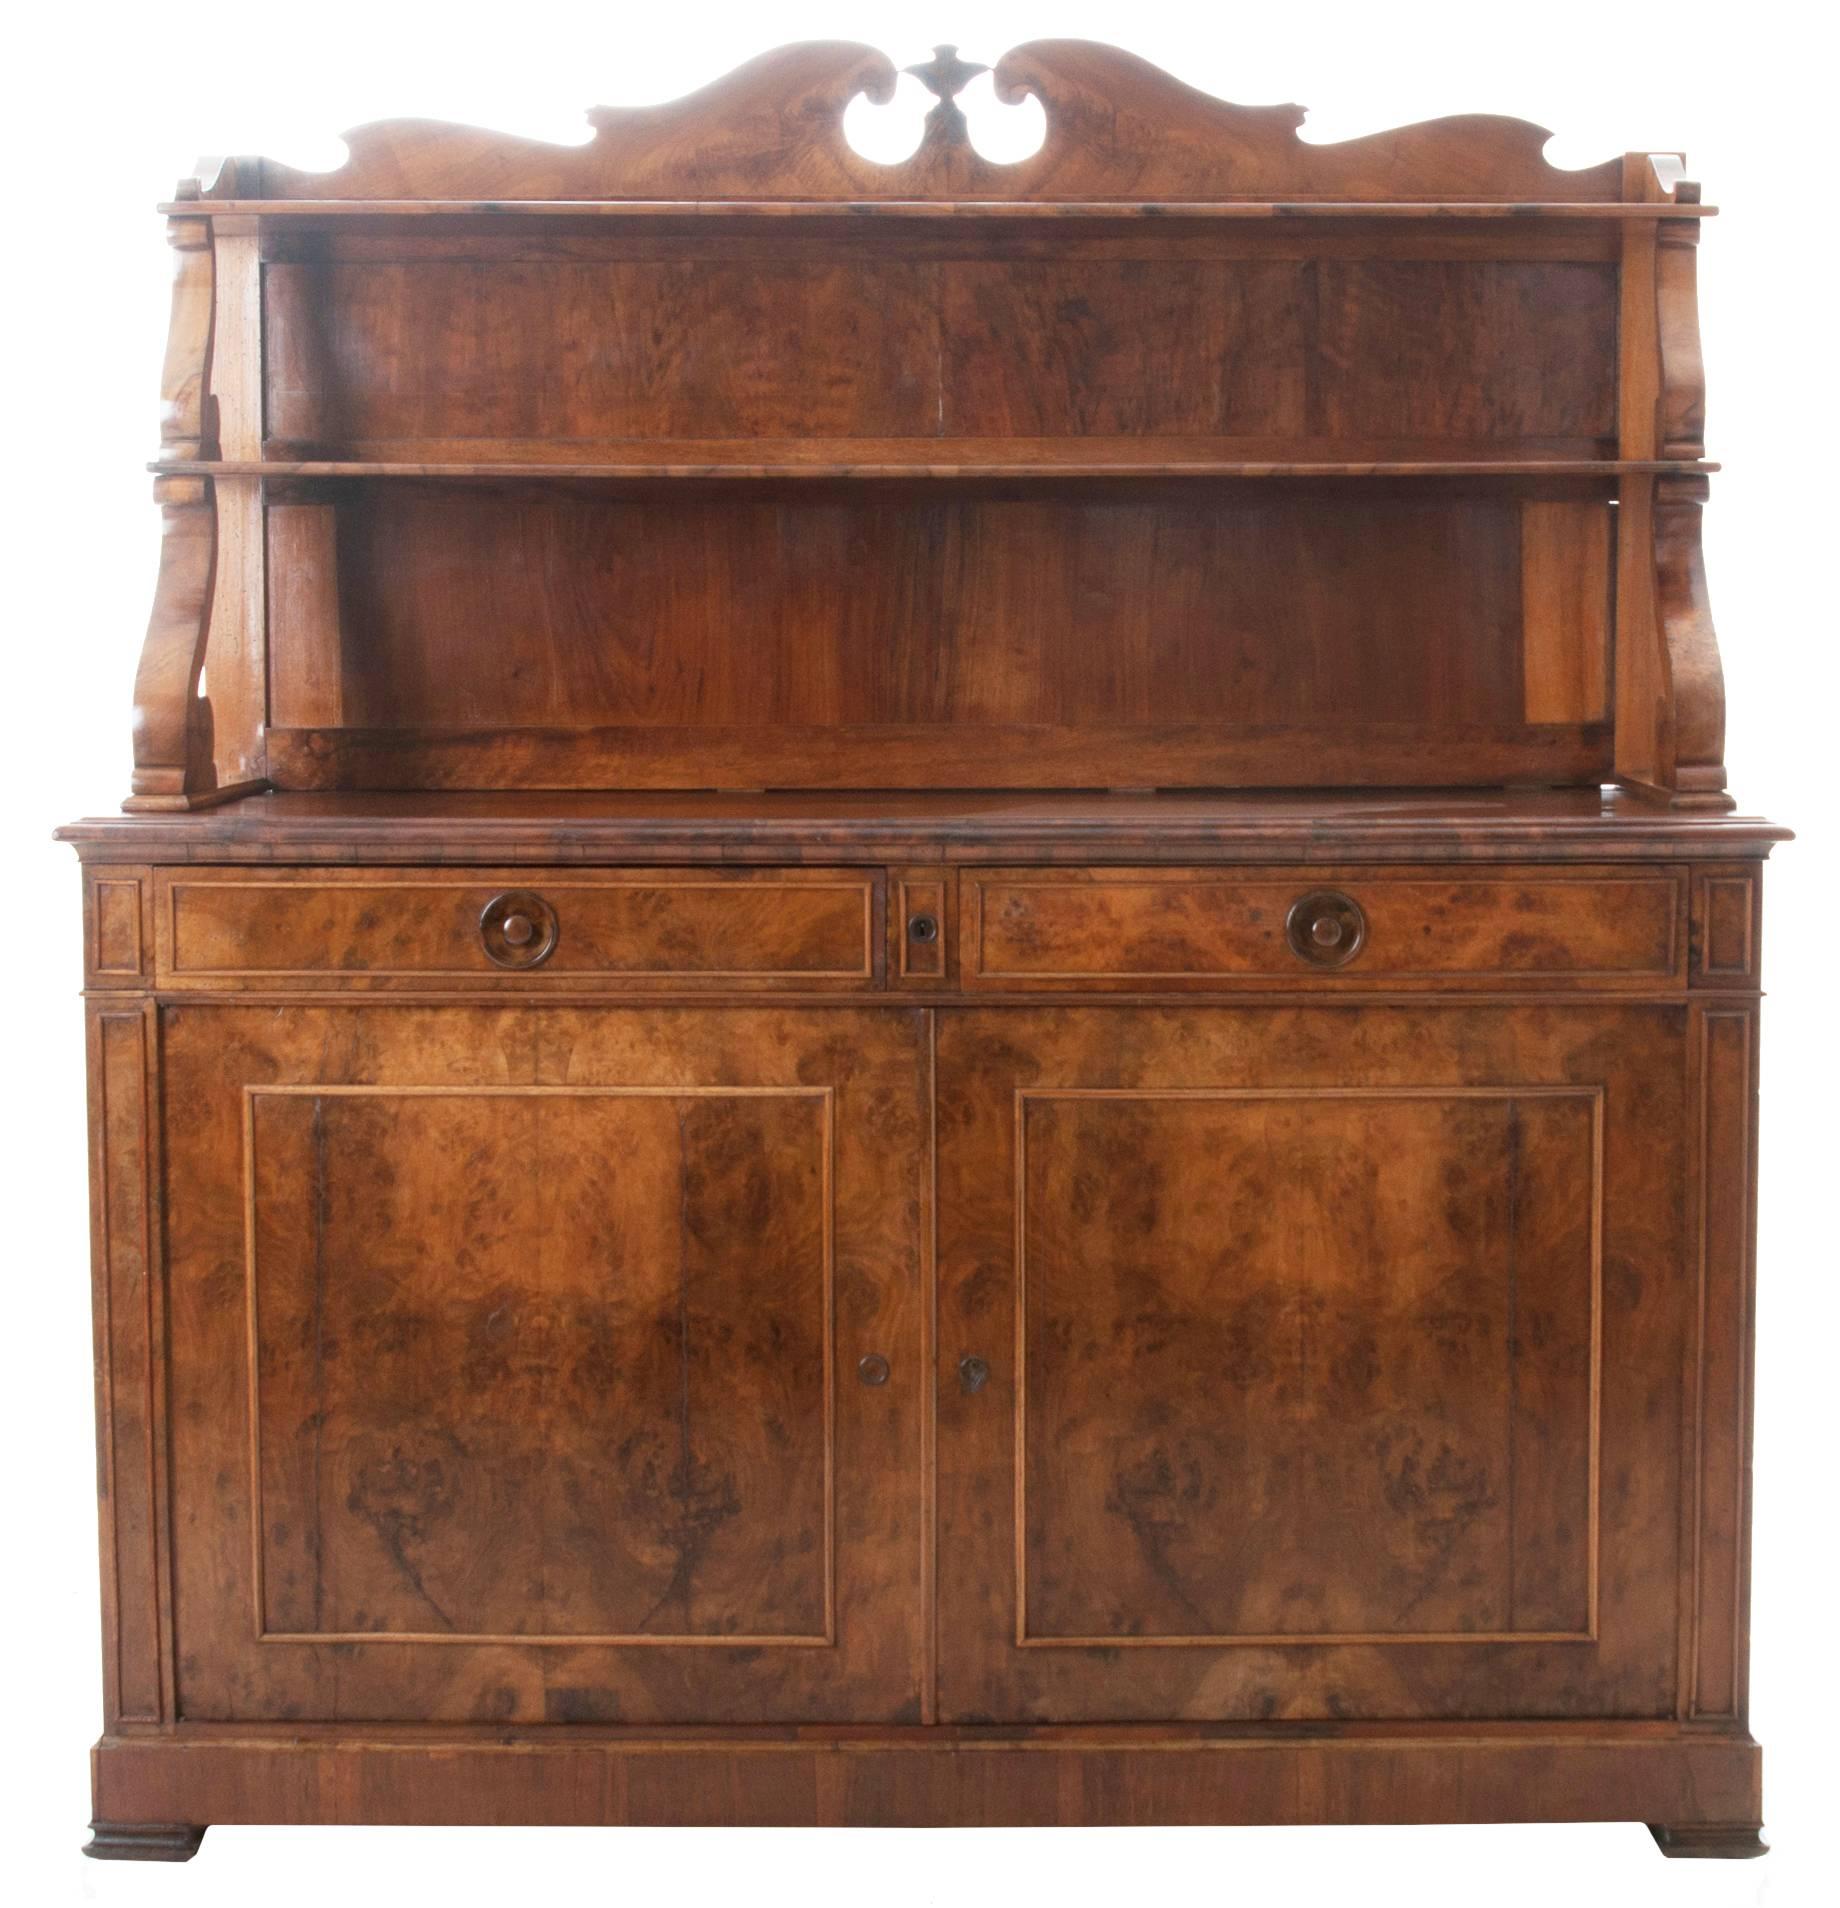 Absolutely handsome Restauration period buffet / server from the 1850s or earlier. The crest at the top is elegantly scalloped and shaped. Sitting over two spacious shelves for stacking your dinner service, held by two elegant scrolled and curved